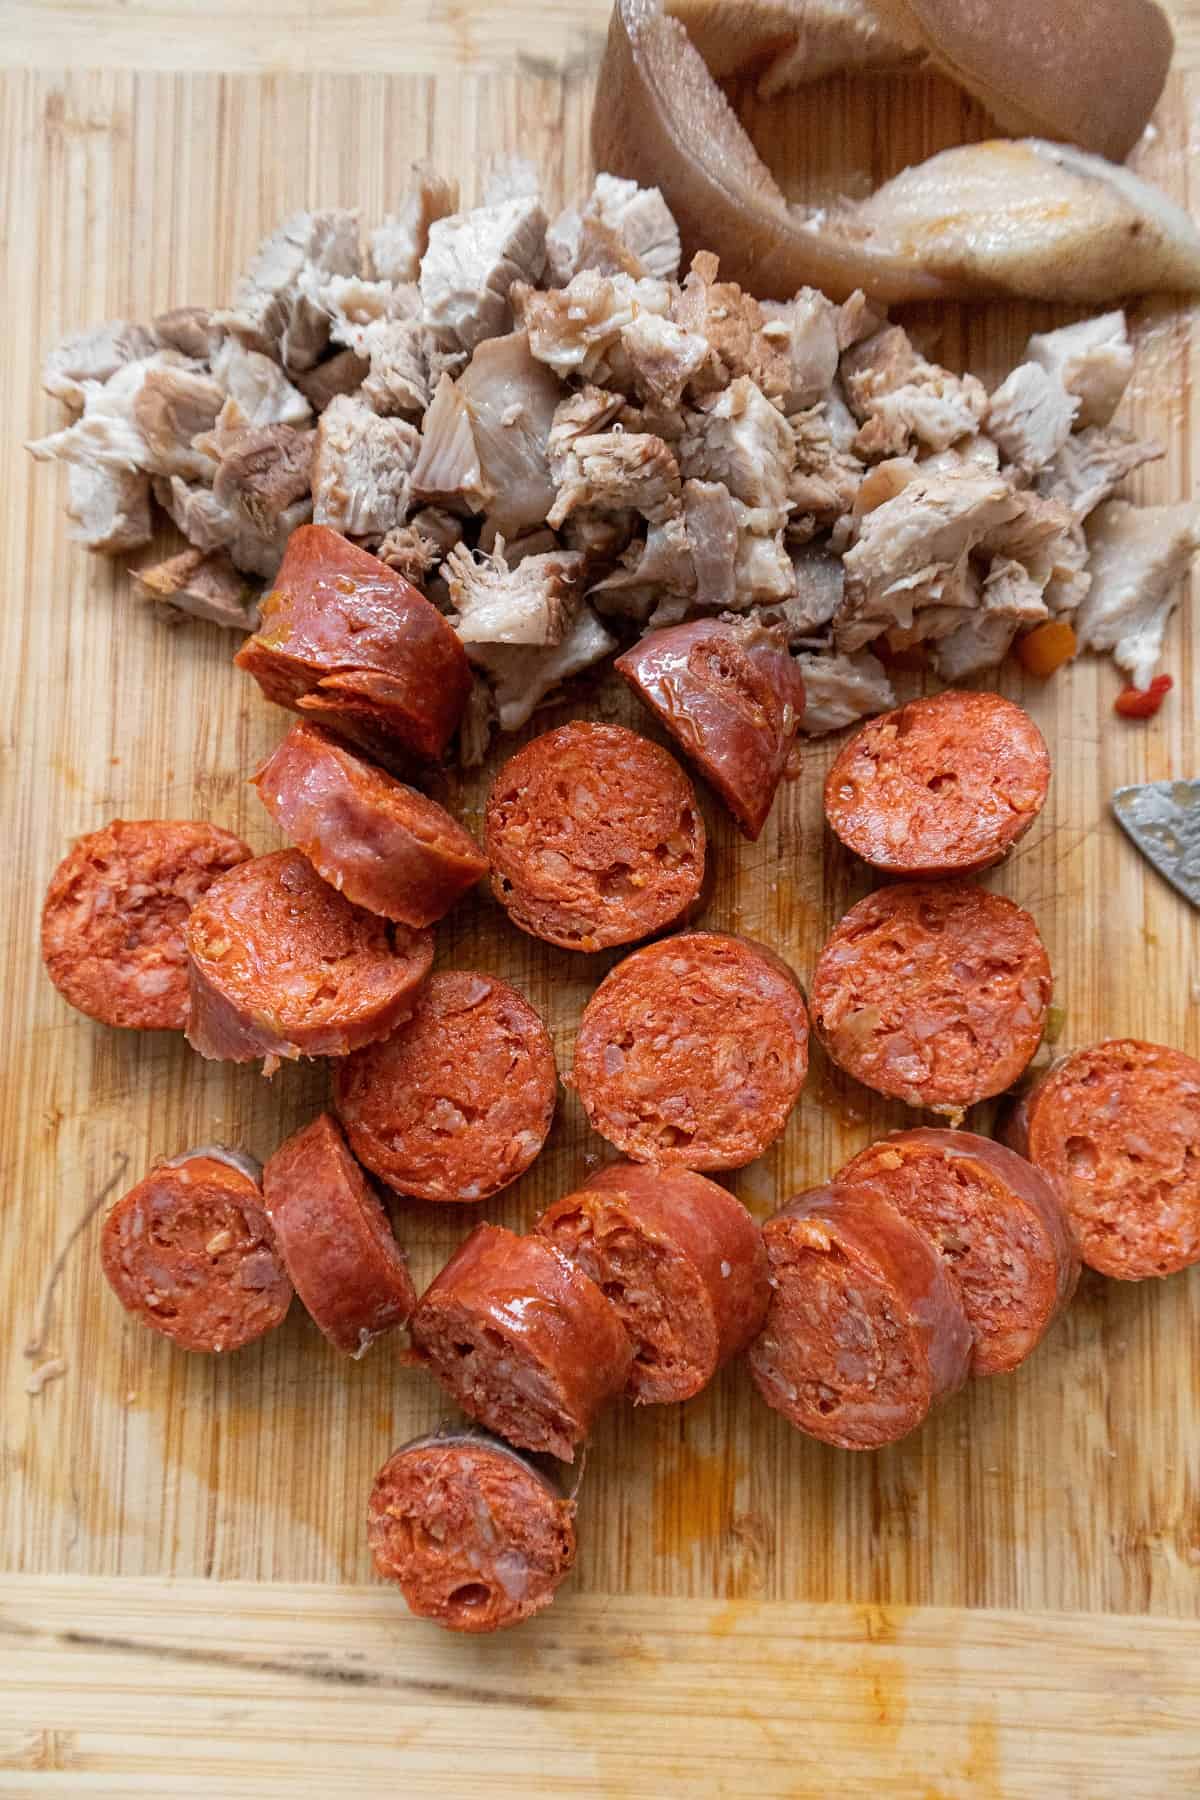 Chopped chorizo and pork belly. Fat removed from the pork belly